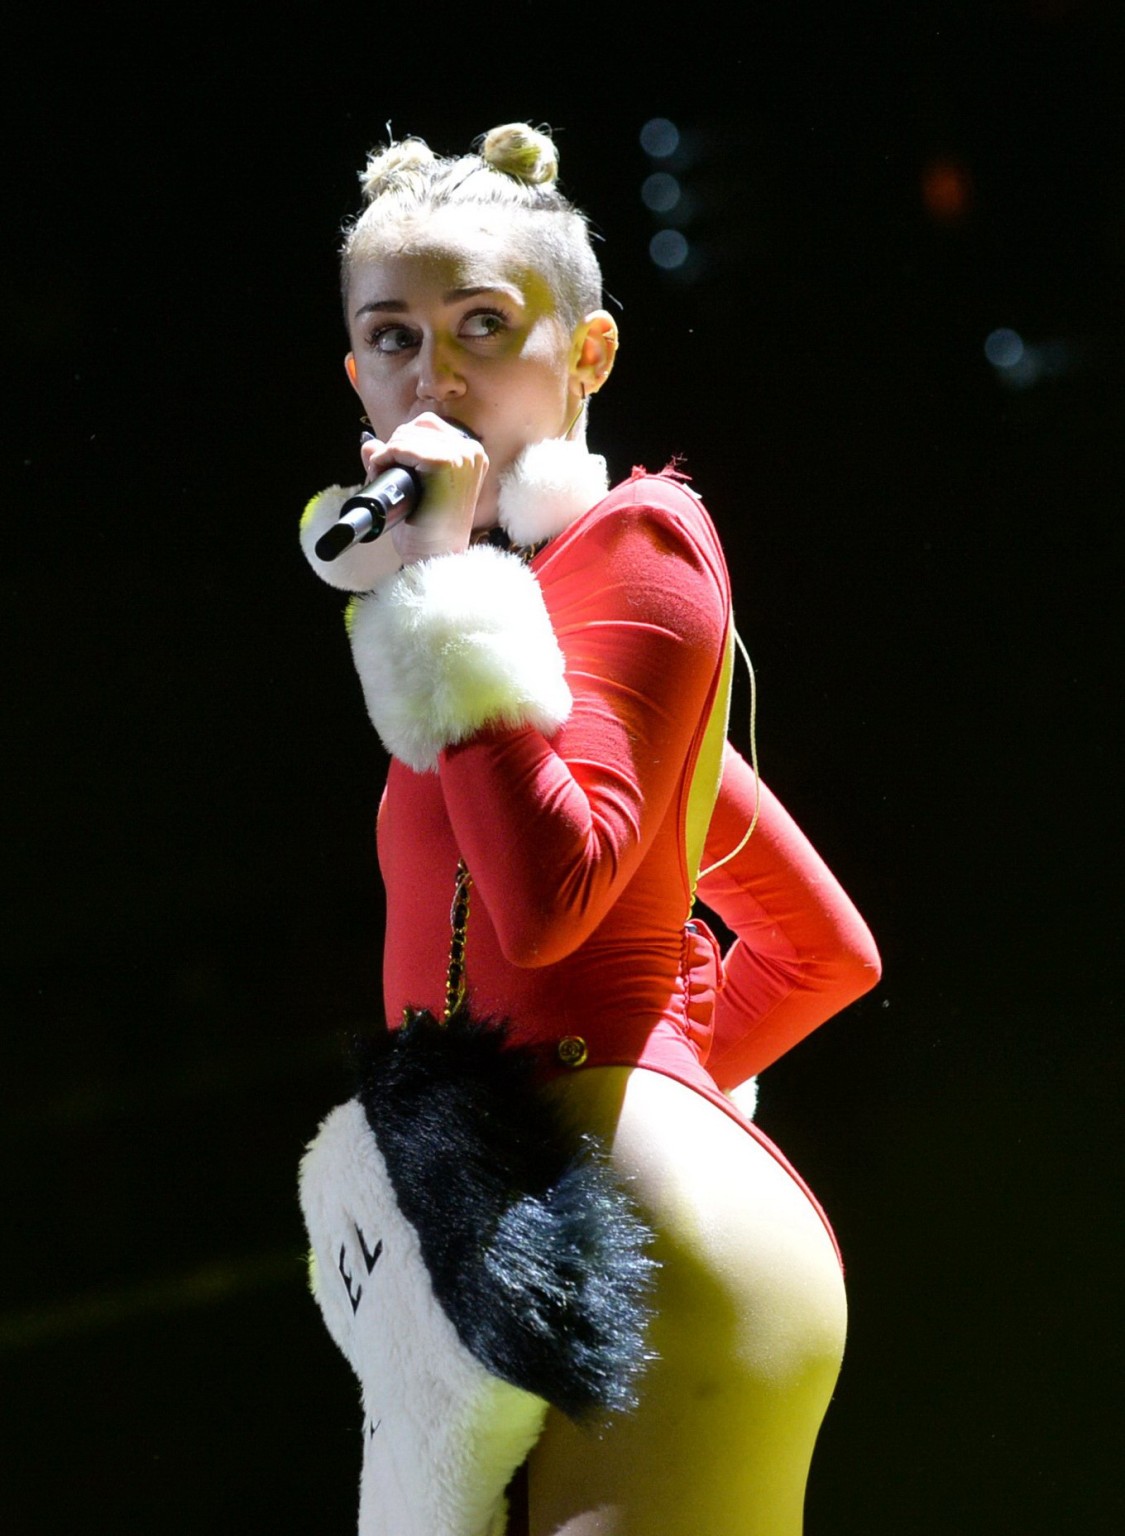 Miley Cyrus shows off pokies and ass wearing a red leotard on stage at 93.3 FLZ' #75209828